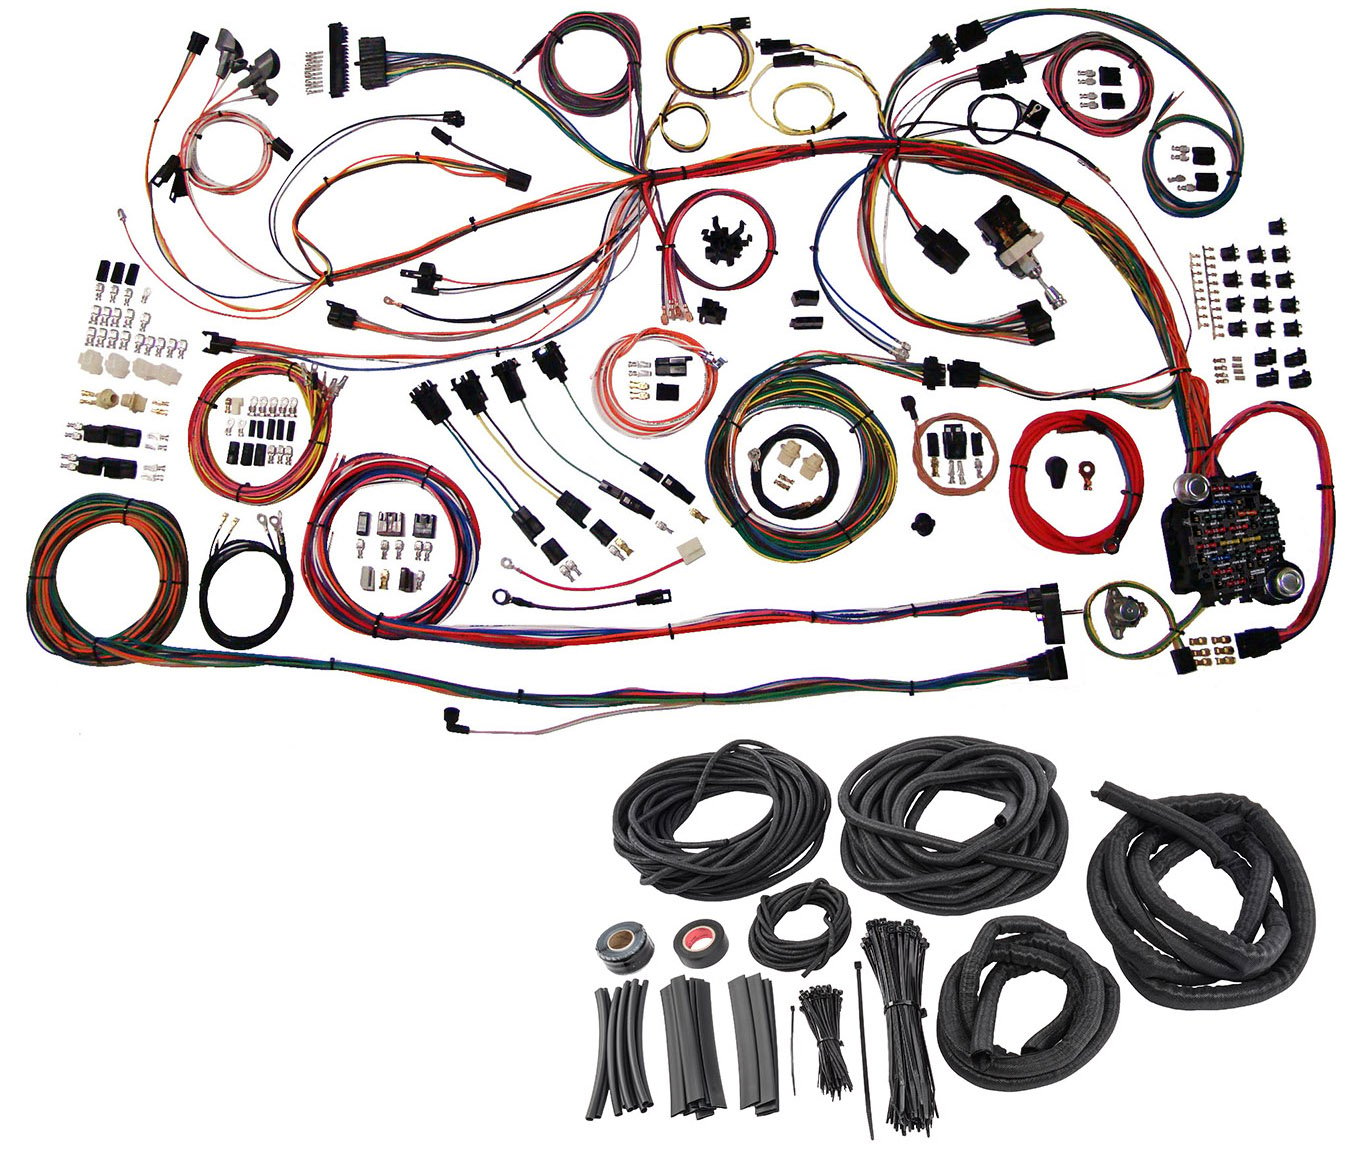 Harness & Braid Cover Kit for 1968-1969 Chevy Chevelle